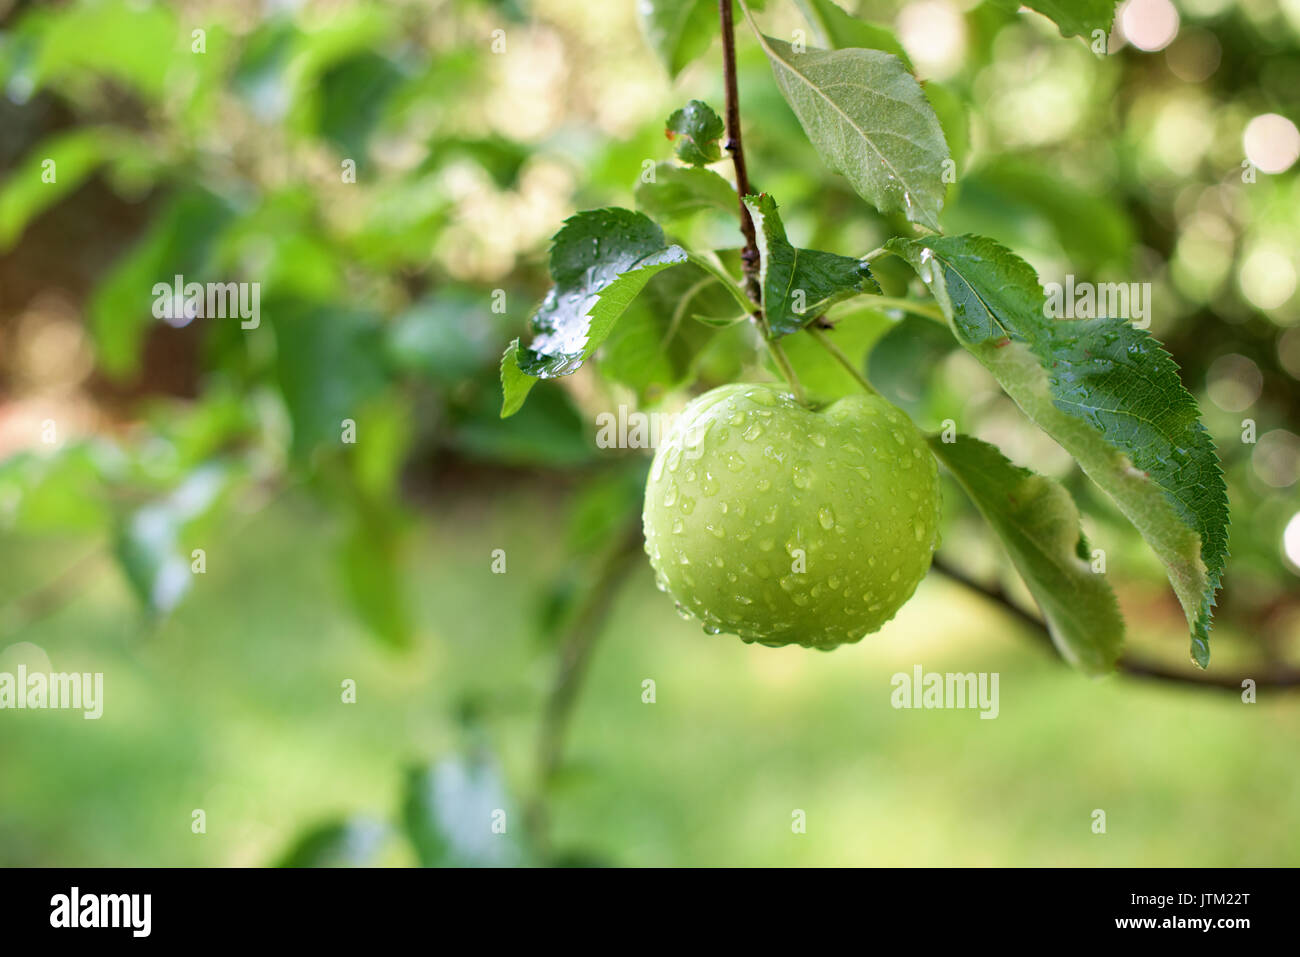 Apple on a brаnch whit water drops on it Stock Photo